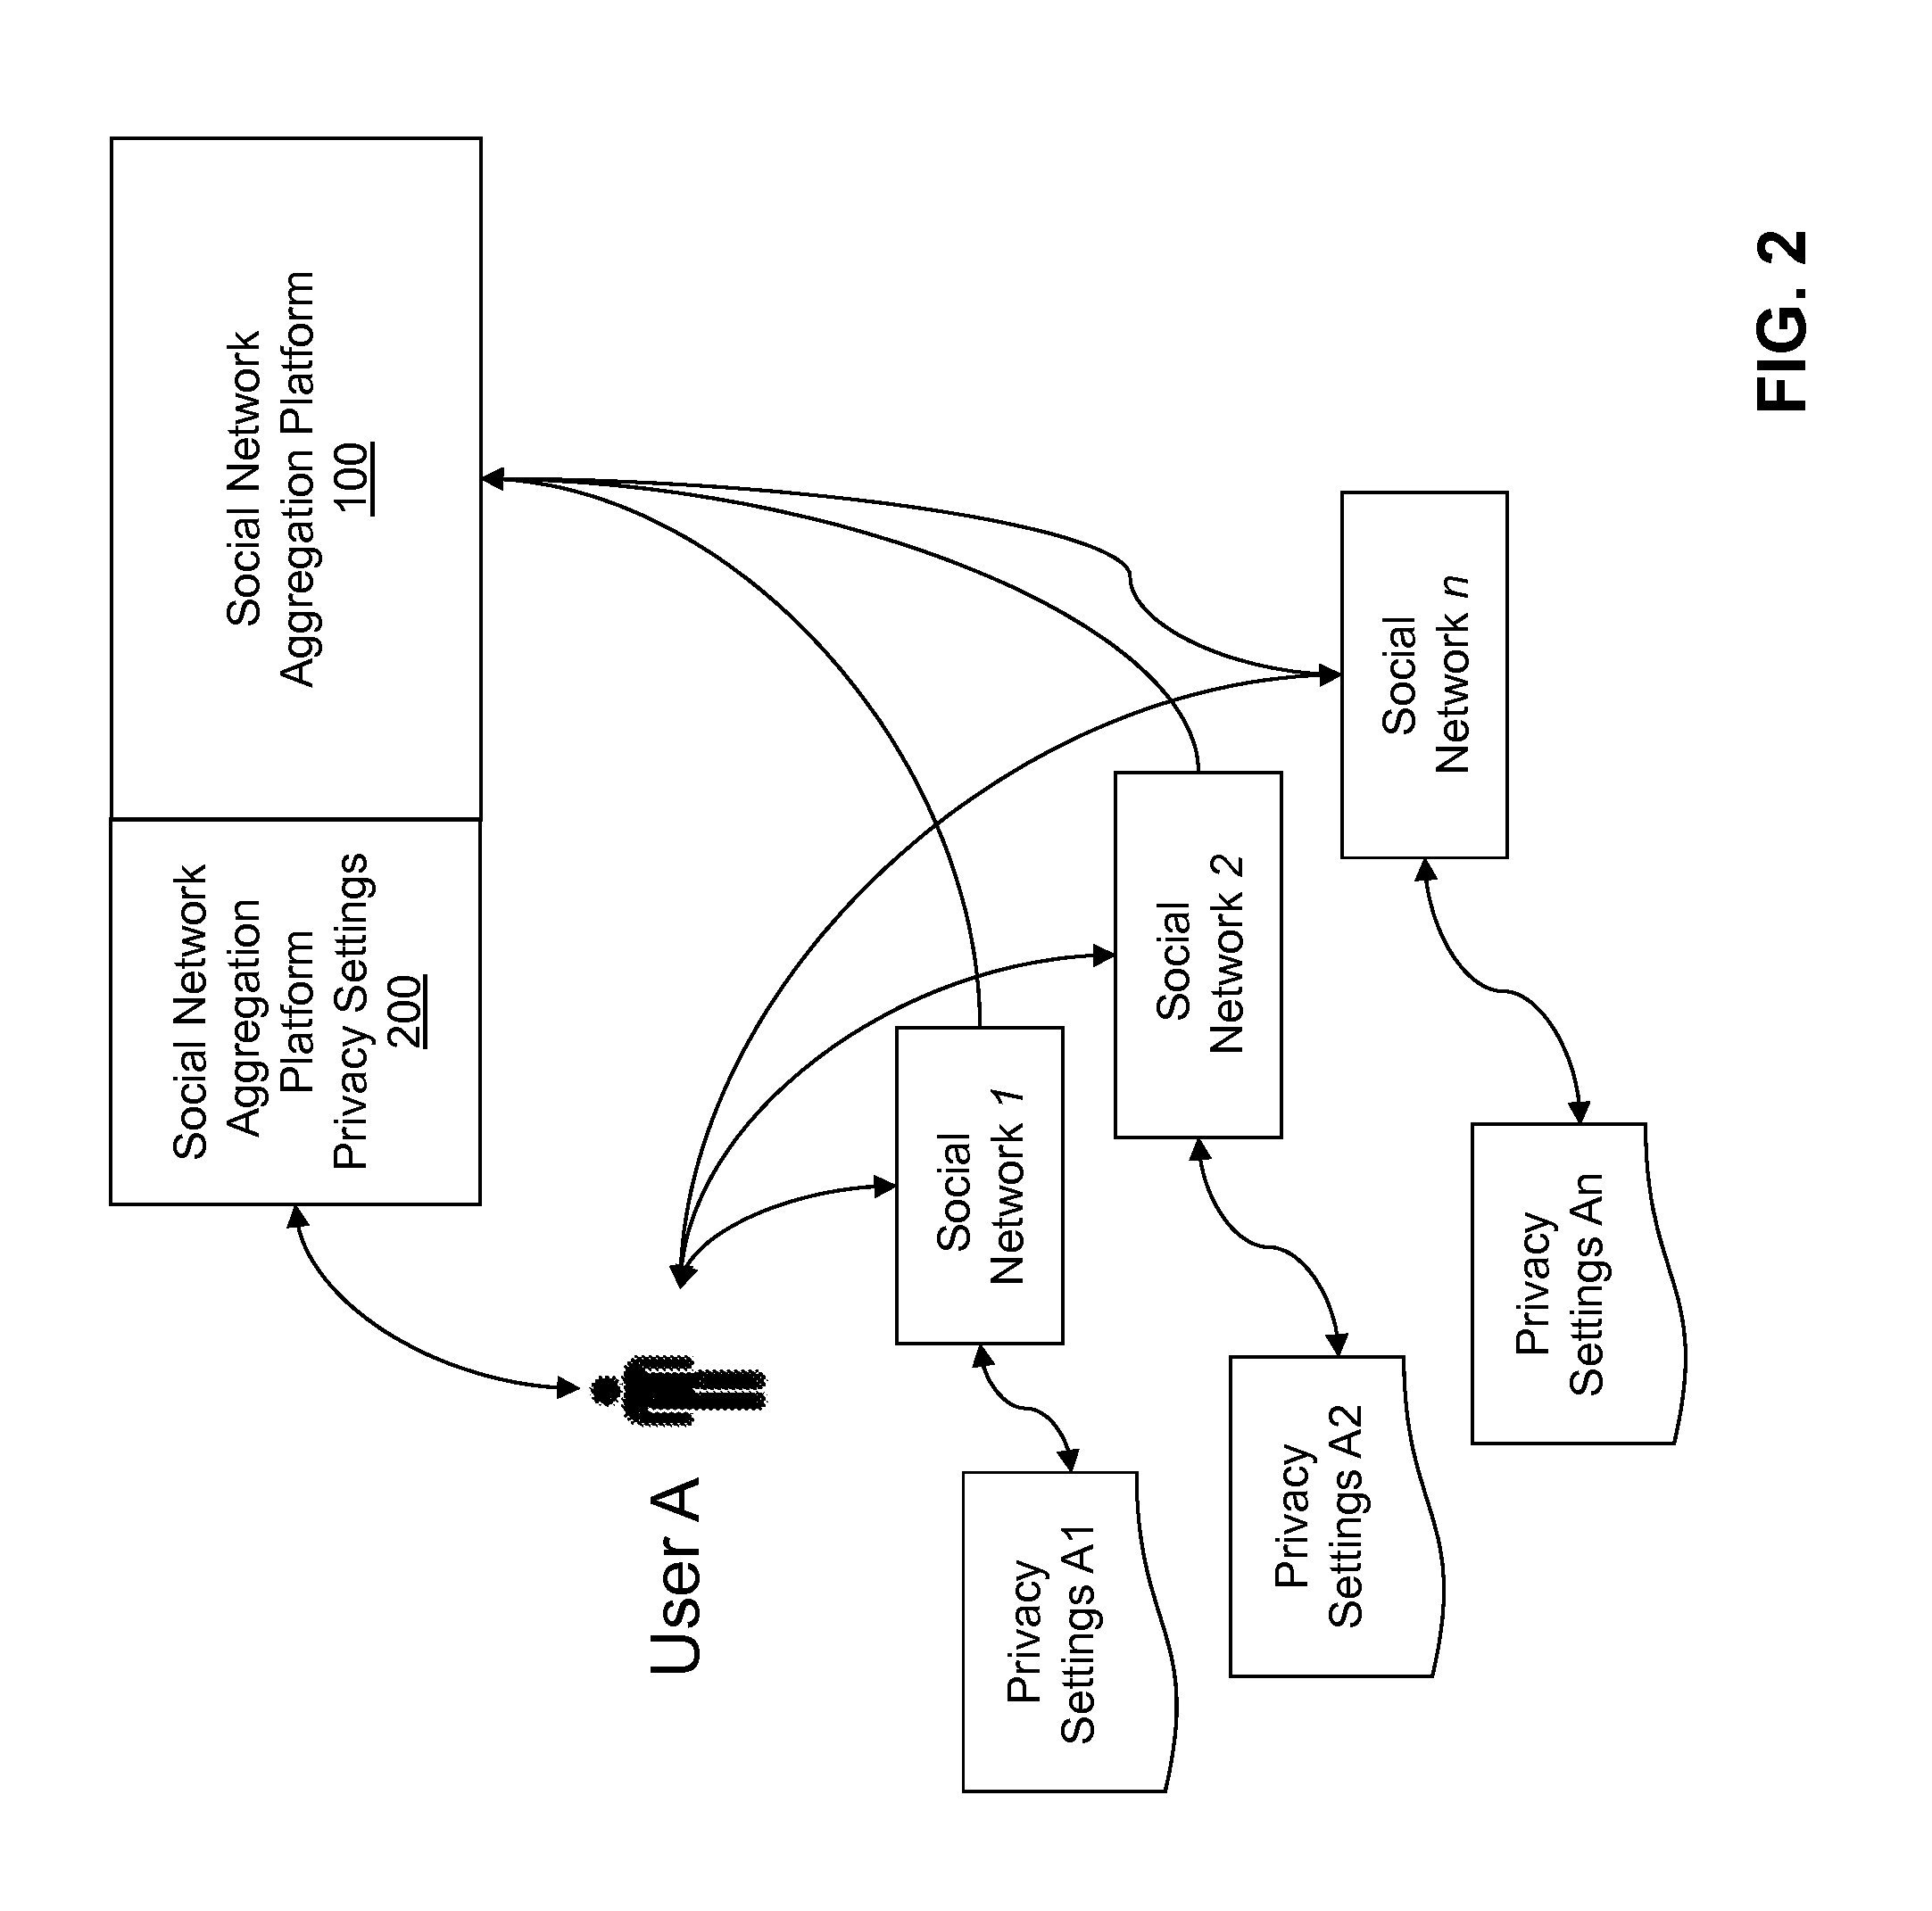 Systems and methods for implementing custom privacy settings